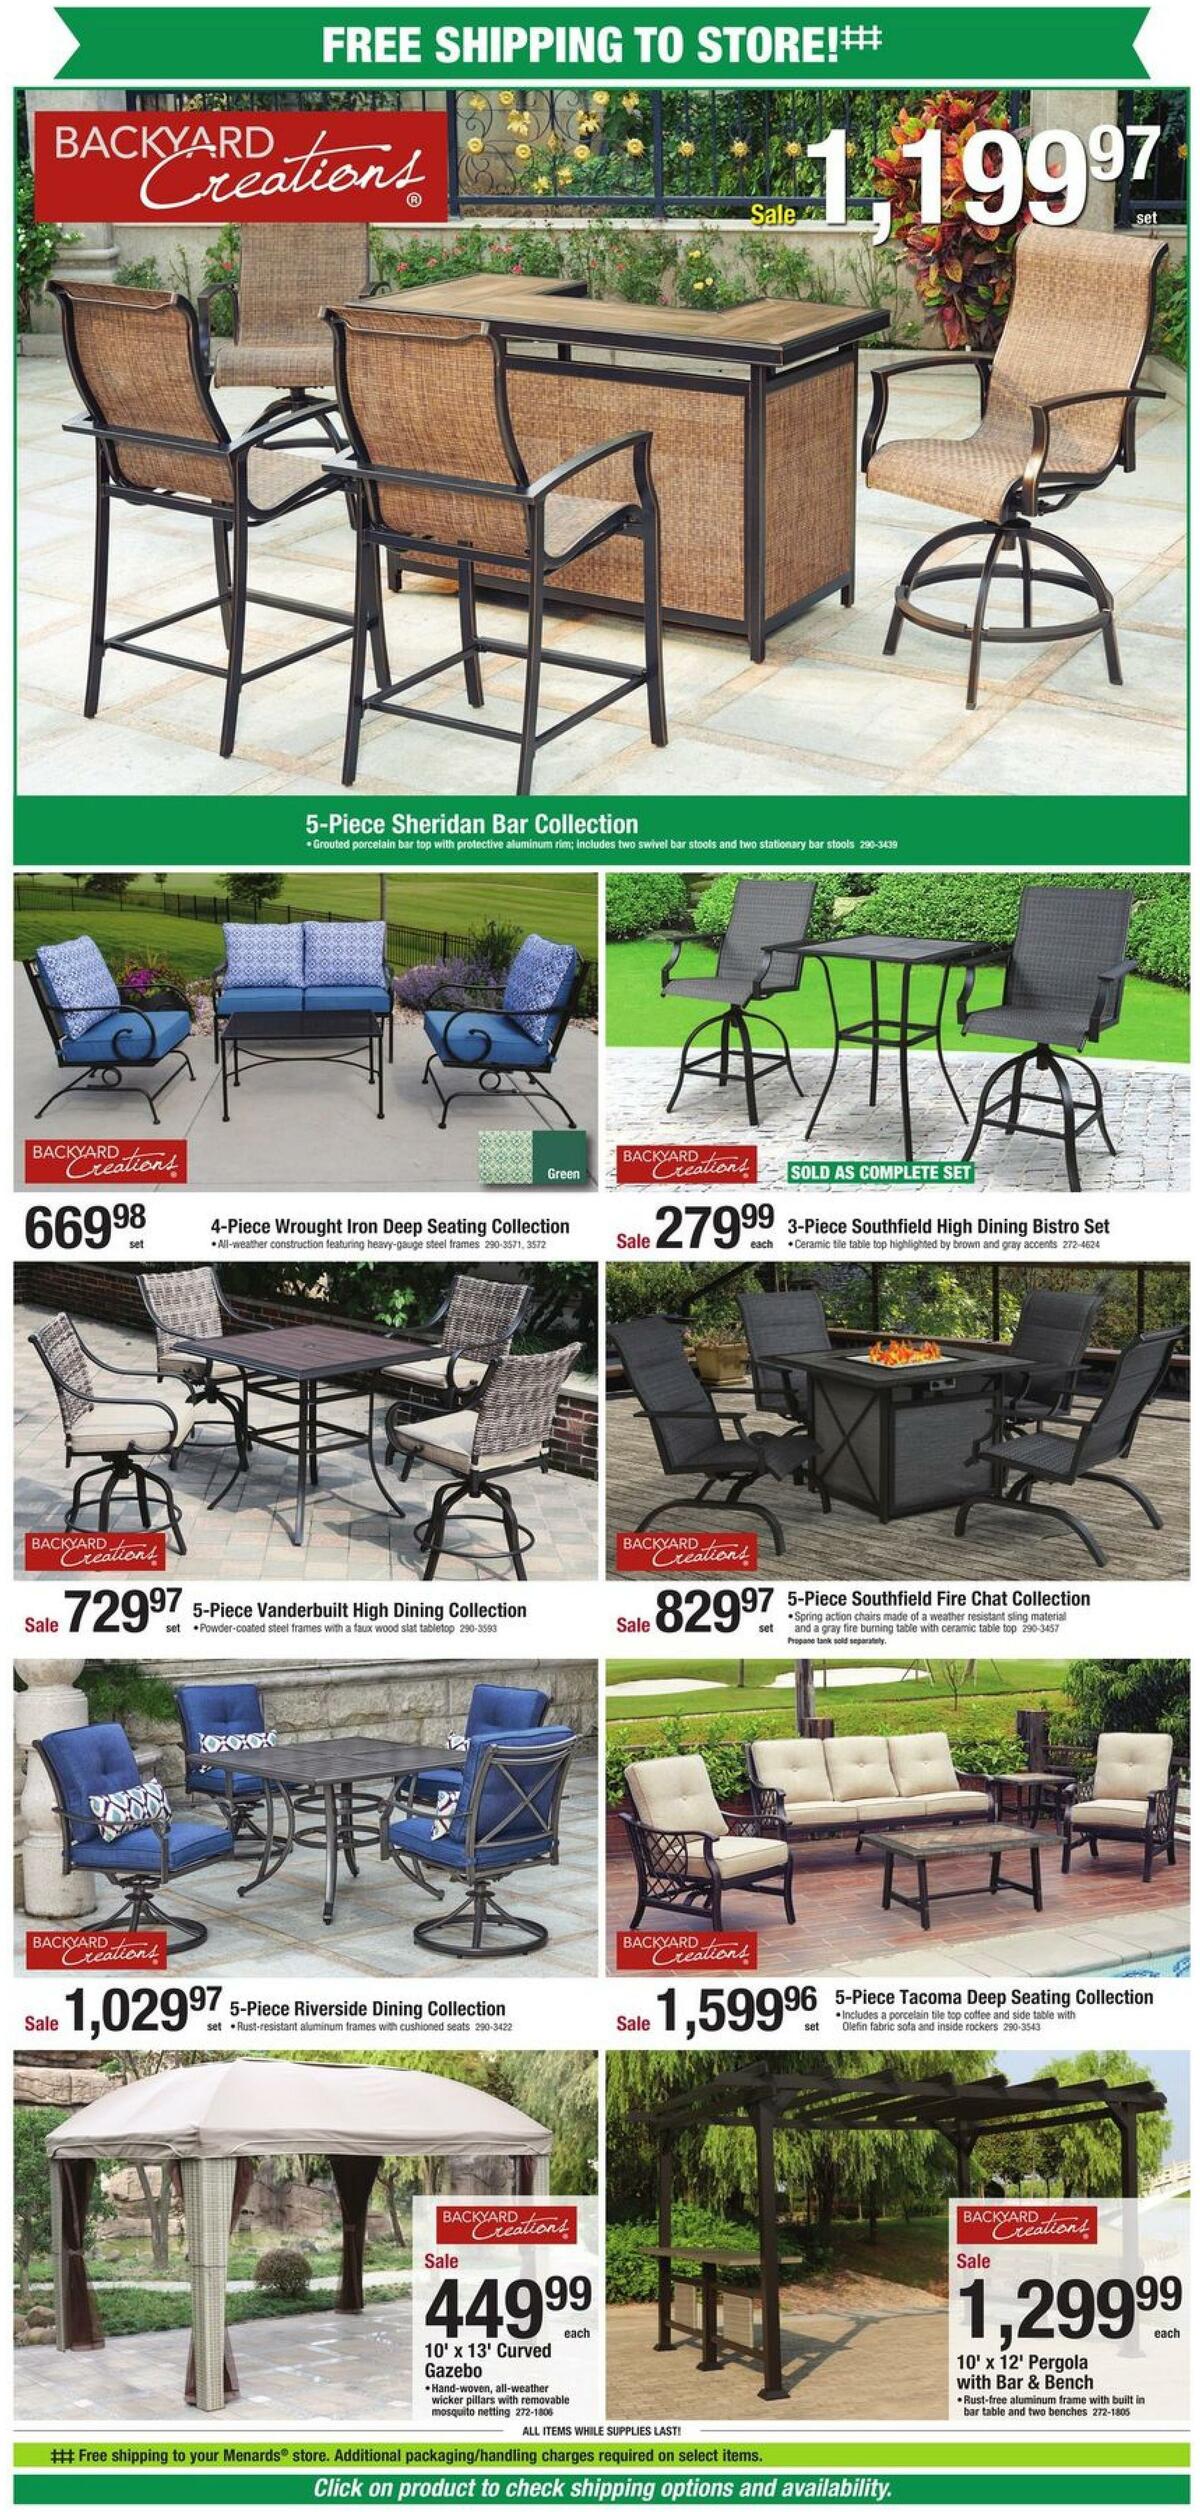 Menards Spring Decks and Landscaping Weekly Ad from April 1